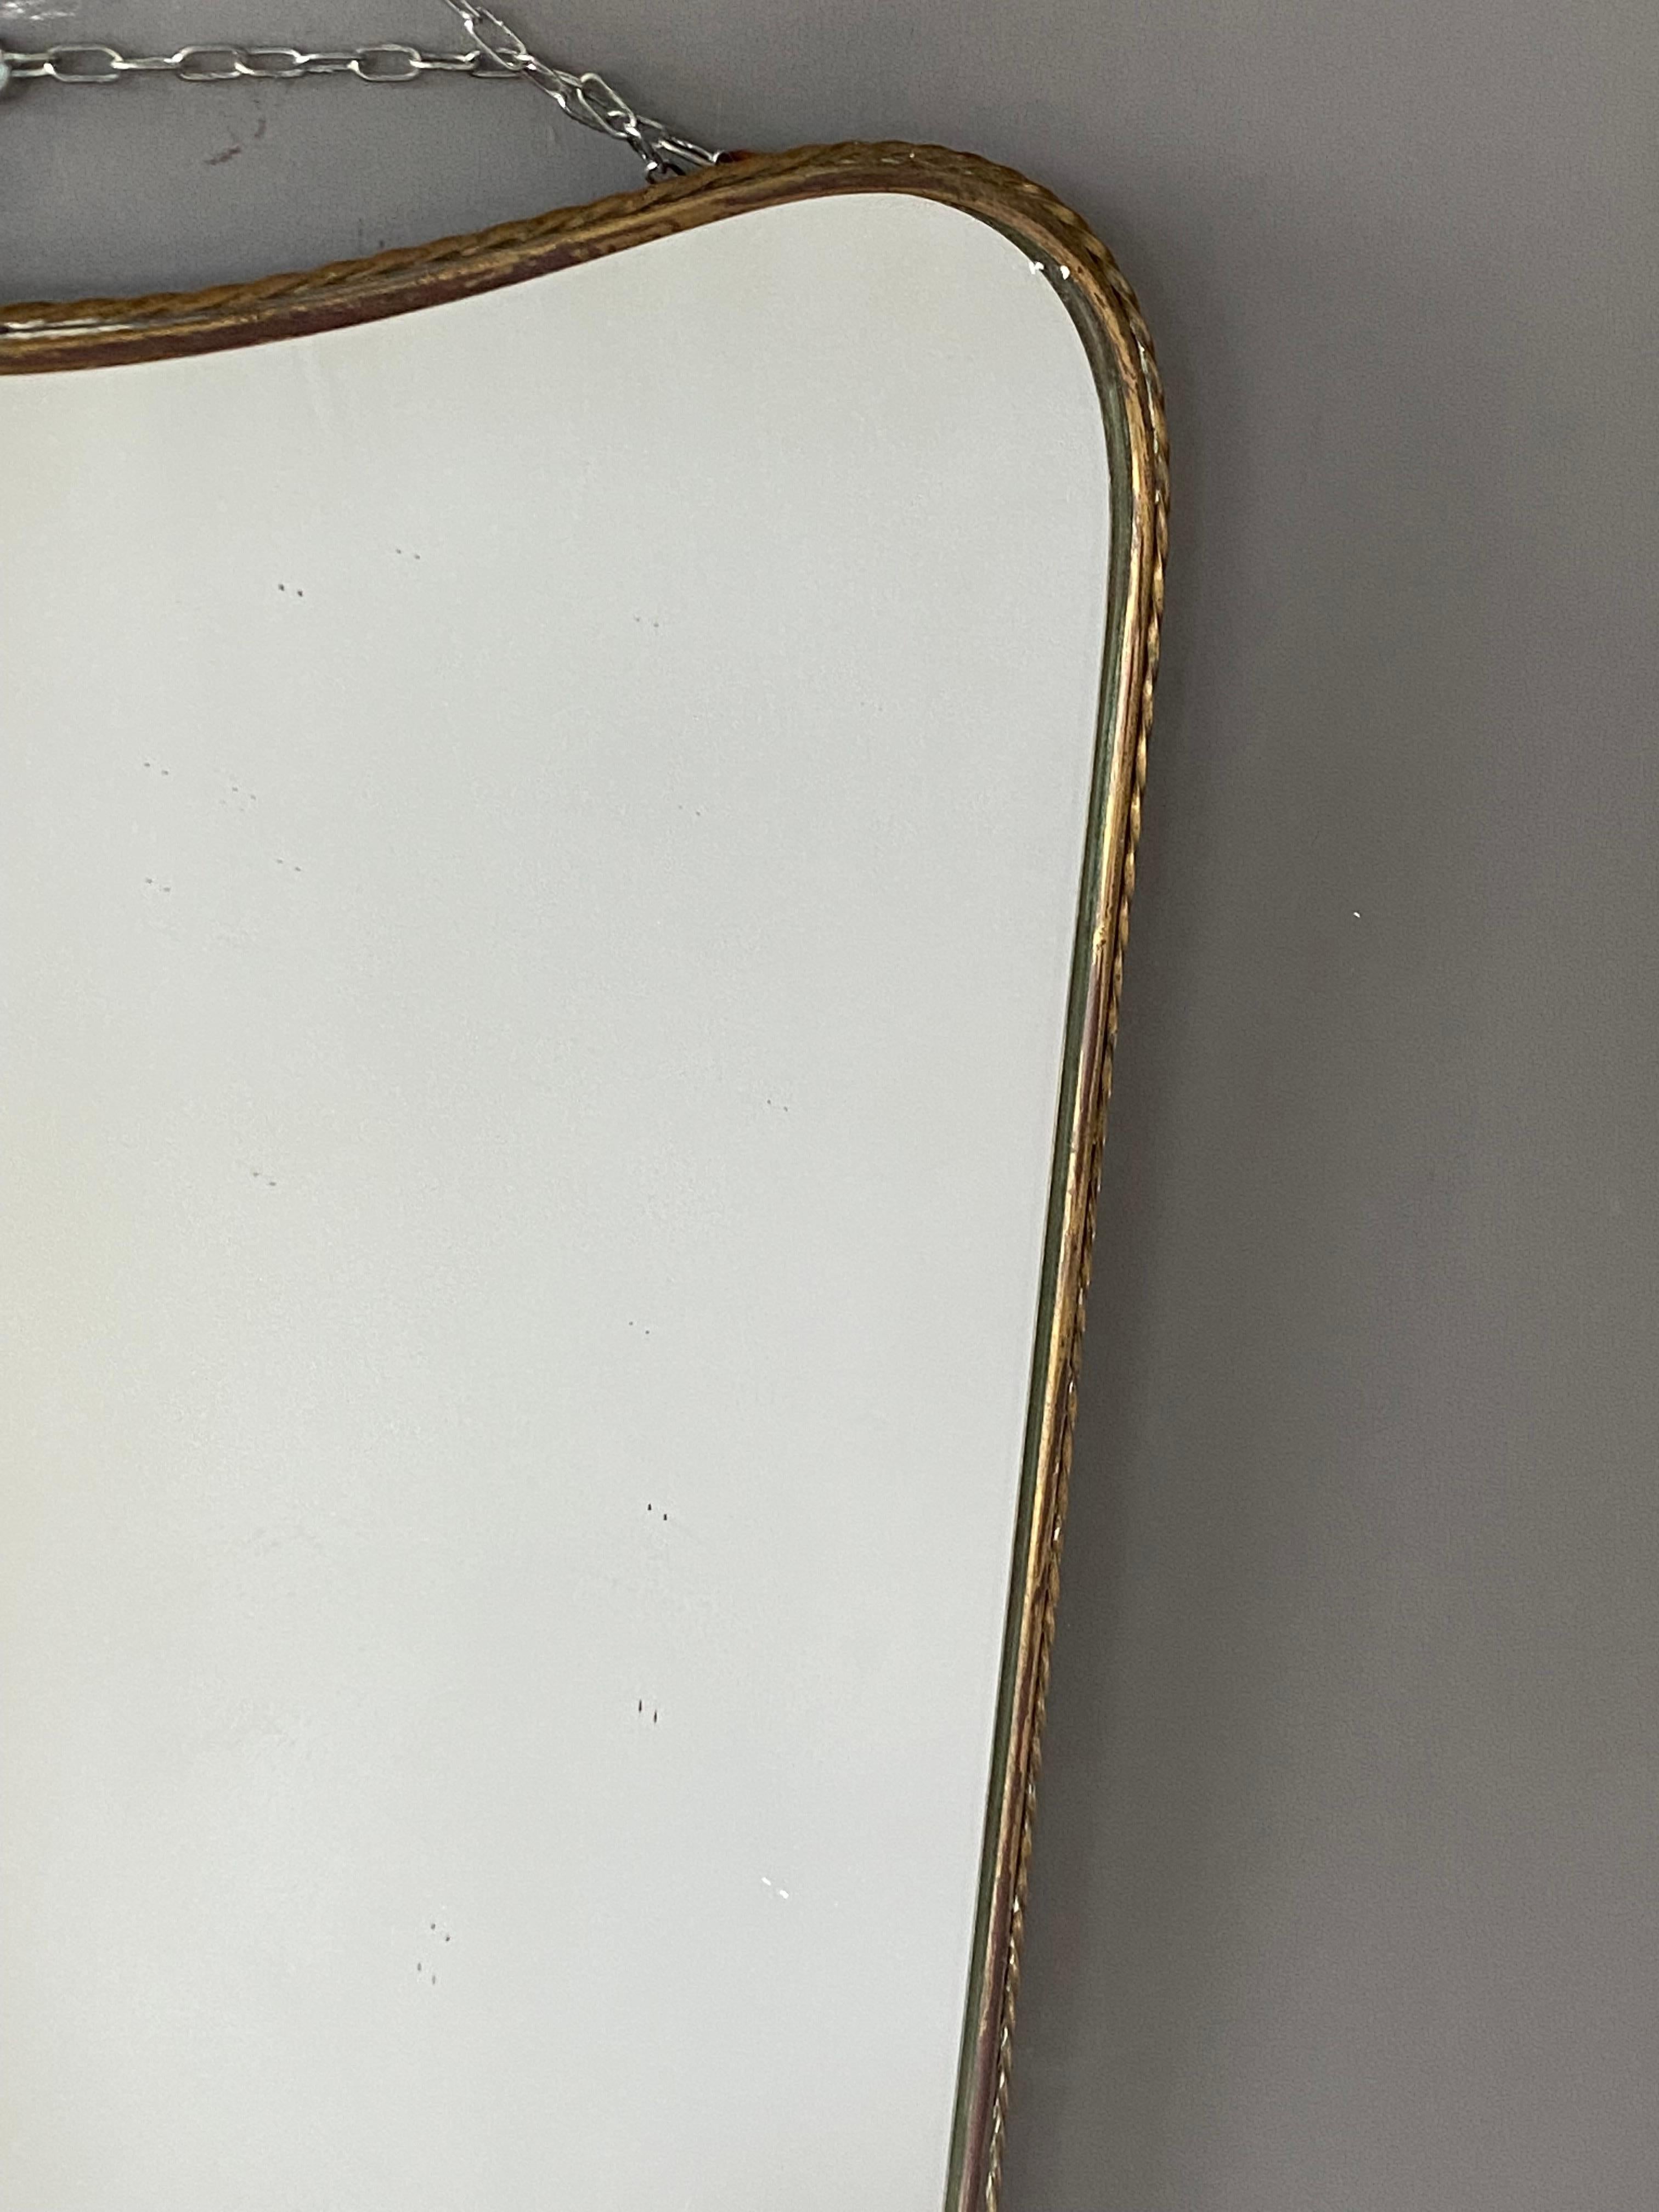 An organic wall mirror, produced in Italy, 1940s. Organically cut mirror glass is framed in brass. Features fine ornamentation.

Other designers of the period include Gio Ponti, Fontana Arte, Max Ingrand, Franco Albini, and Josef Frank.